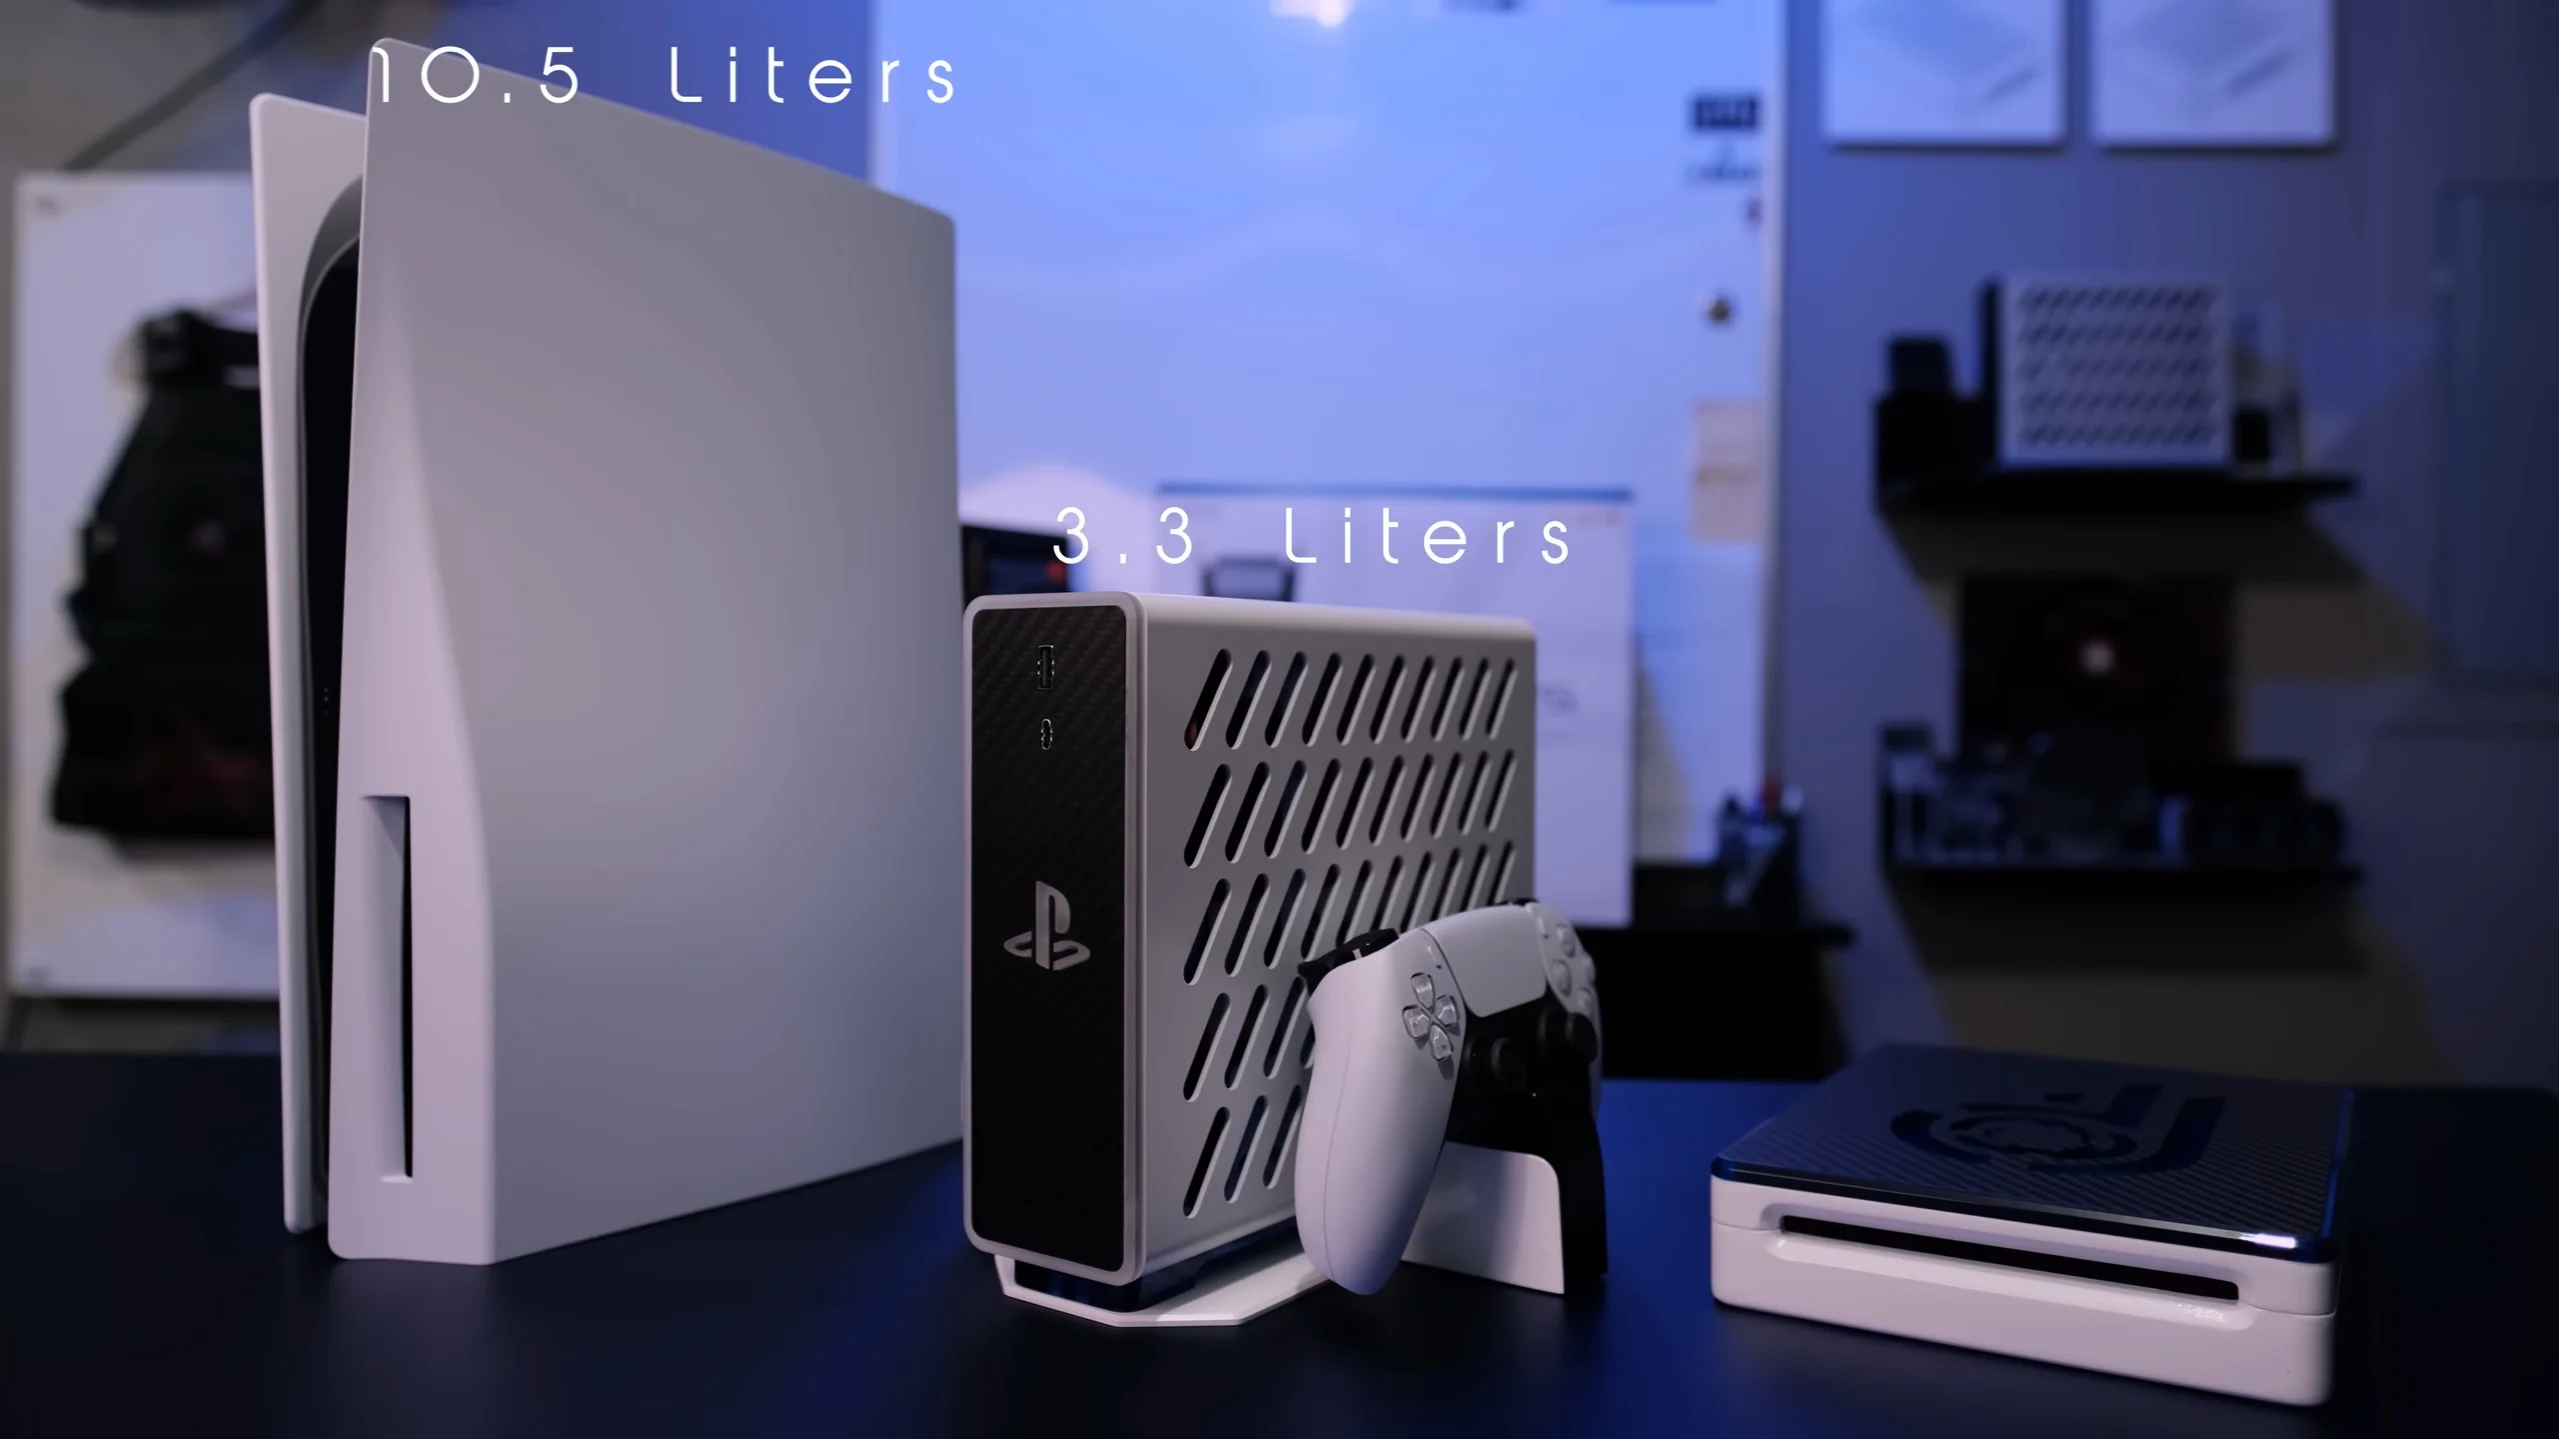 An enthusiast showed what a compact PlayStation 5 Slim could look like